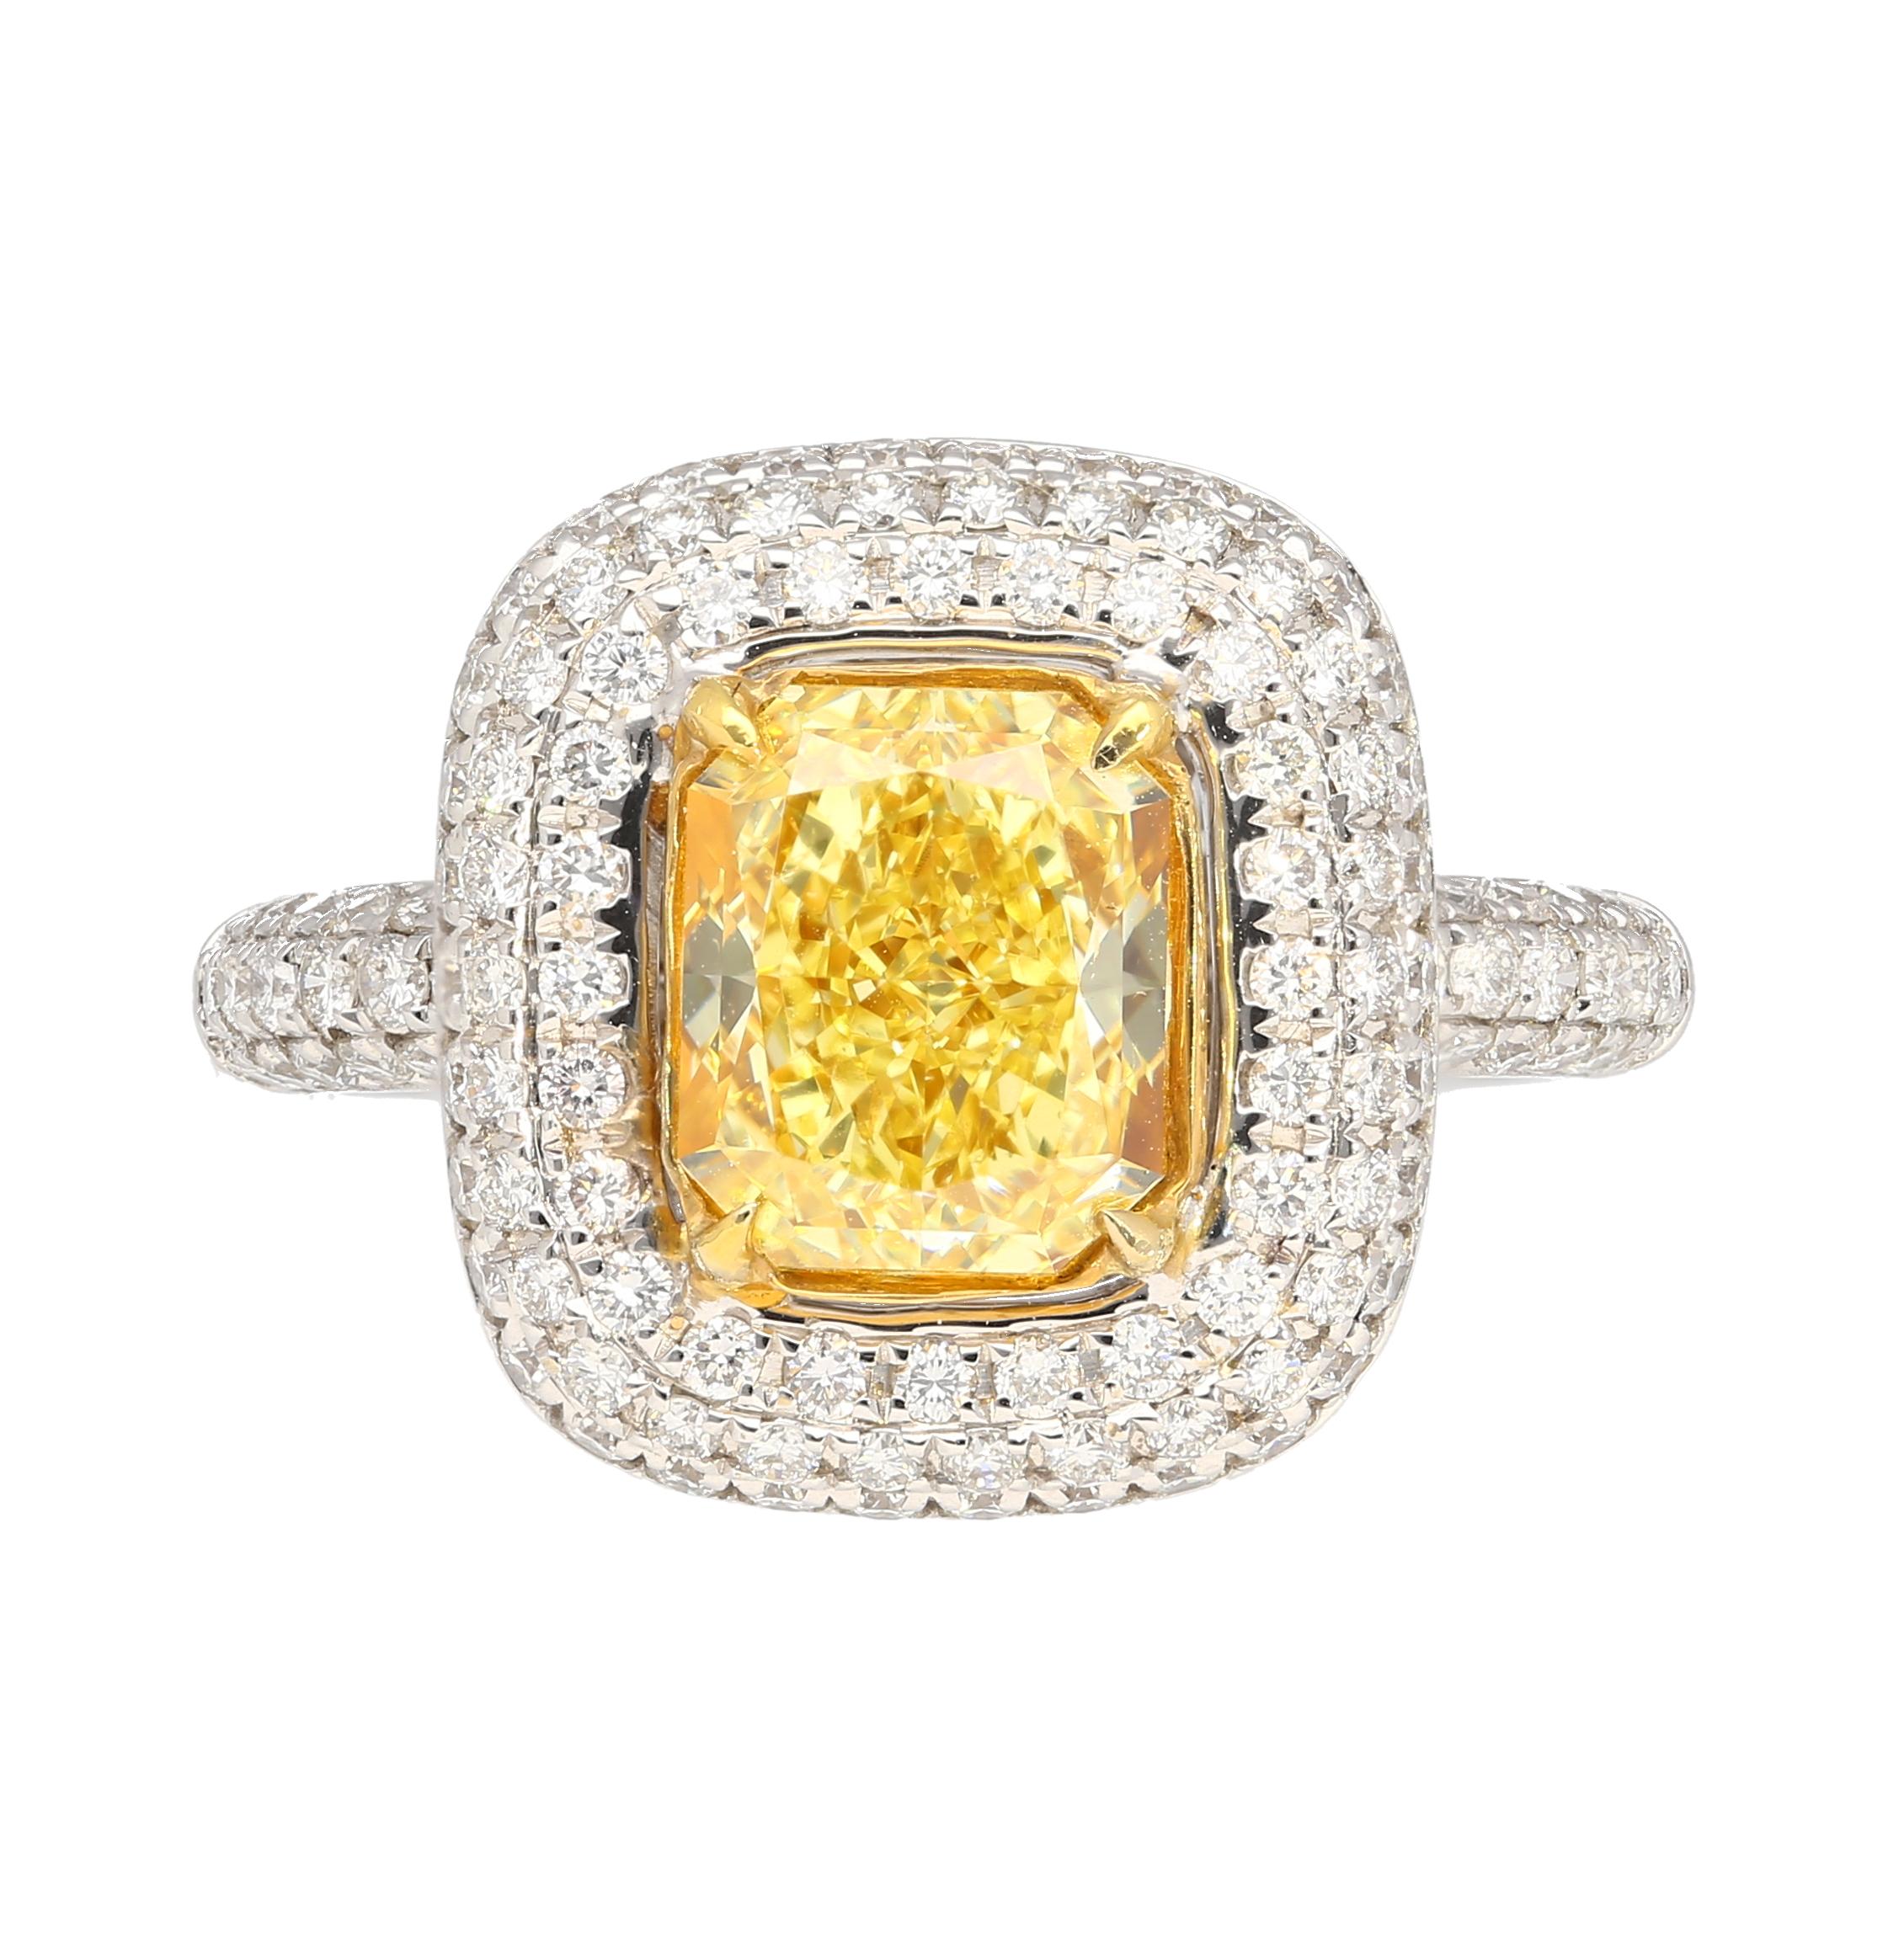 GIA certified 2.35 carat fancy yellow radiant cut diamond engagement ring. Set in 18k white and yellow gold. The ring features a dazzling round cut white diamond encrusted ring shank, yellow gold prongs, and an open back on the culet, allowing for